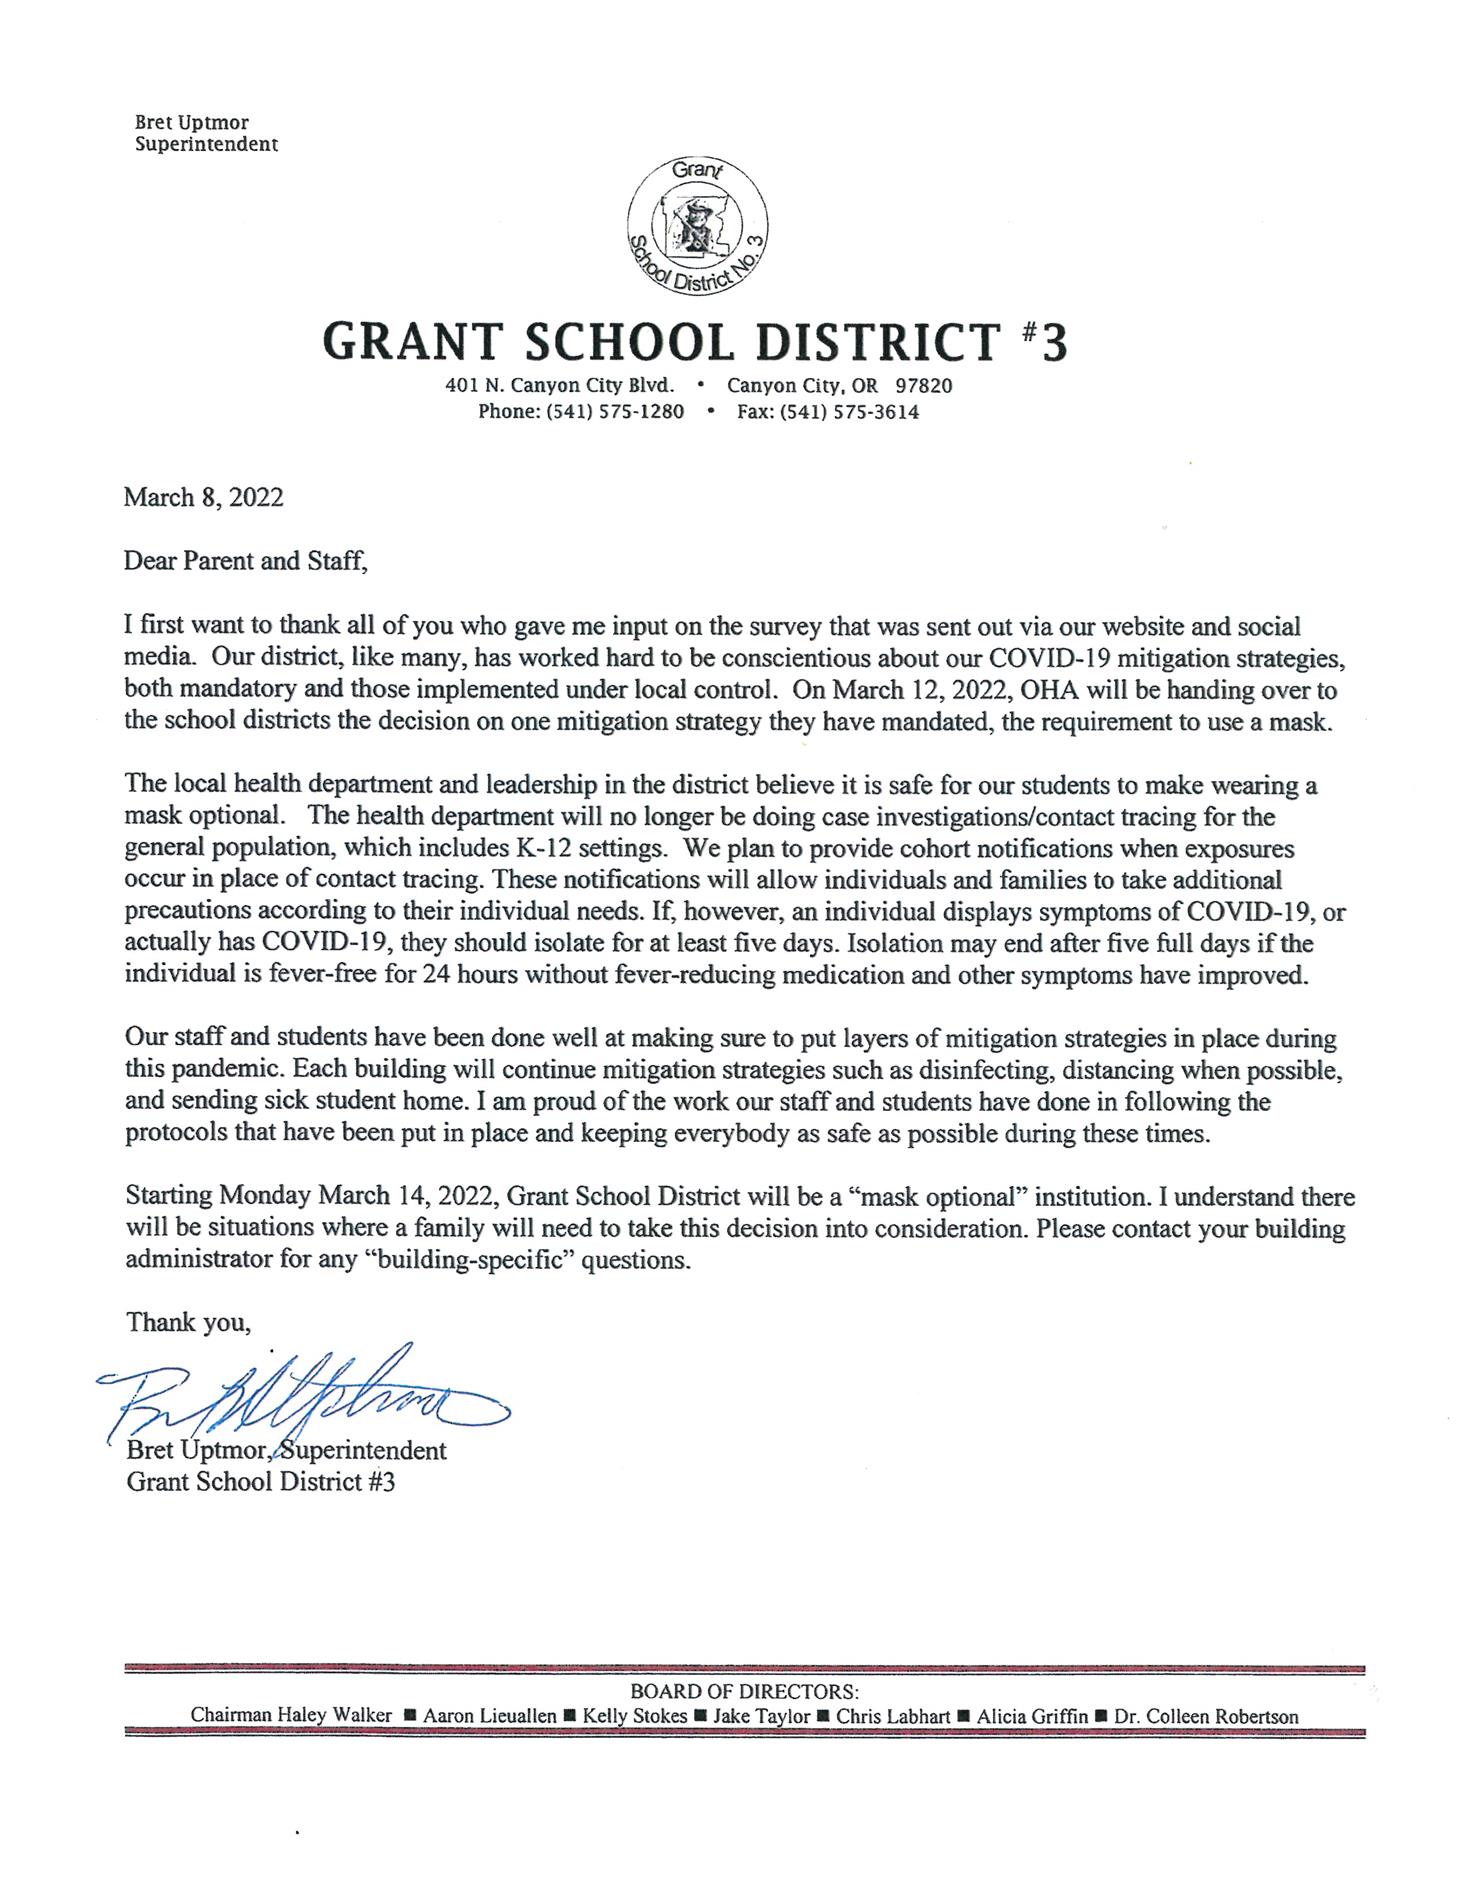 Letter from Superintendent 3-8-22